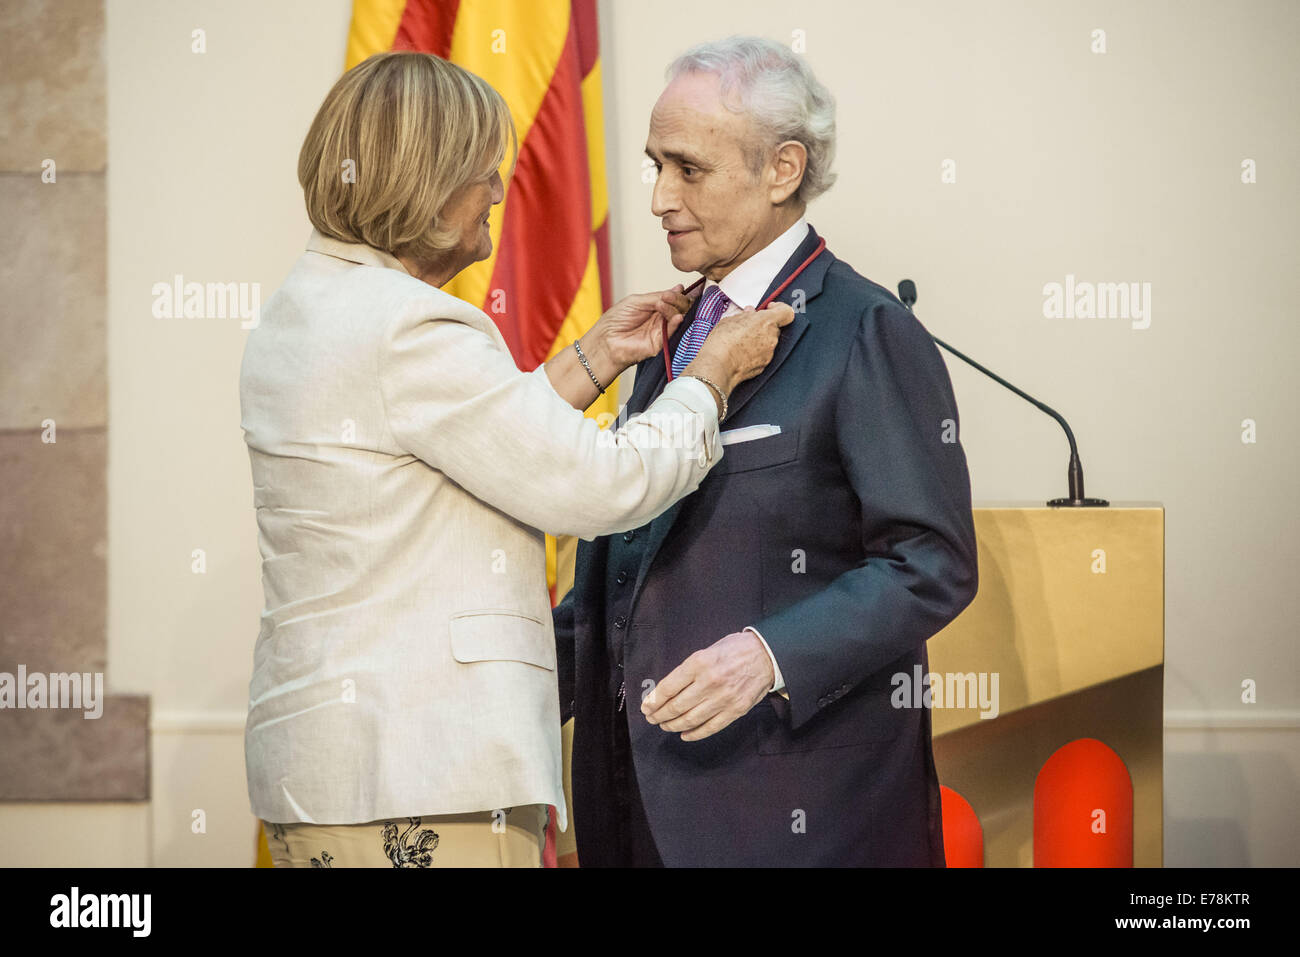 Sept. 9, 2014 - NURIA DE GISPERT, president of the Catalan Parliament, honors JOSEP CARRERAS I COLL, better known as JOSE CARRERAS, in recognition of his artistic and humanitarian work with his leukemia foundation in the auditorium of the parliament for the honor ceremony Credit:  Matthias Oesterle/ZUMA Wire/ZUMAPRESS.com/Alamy Live News Stock Photo